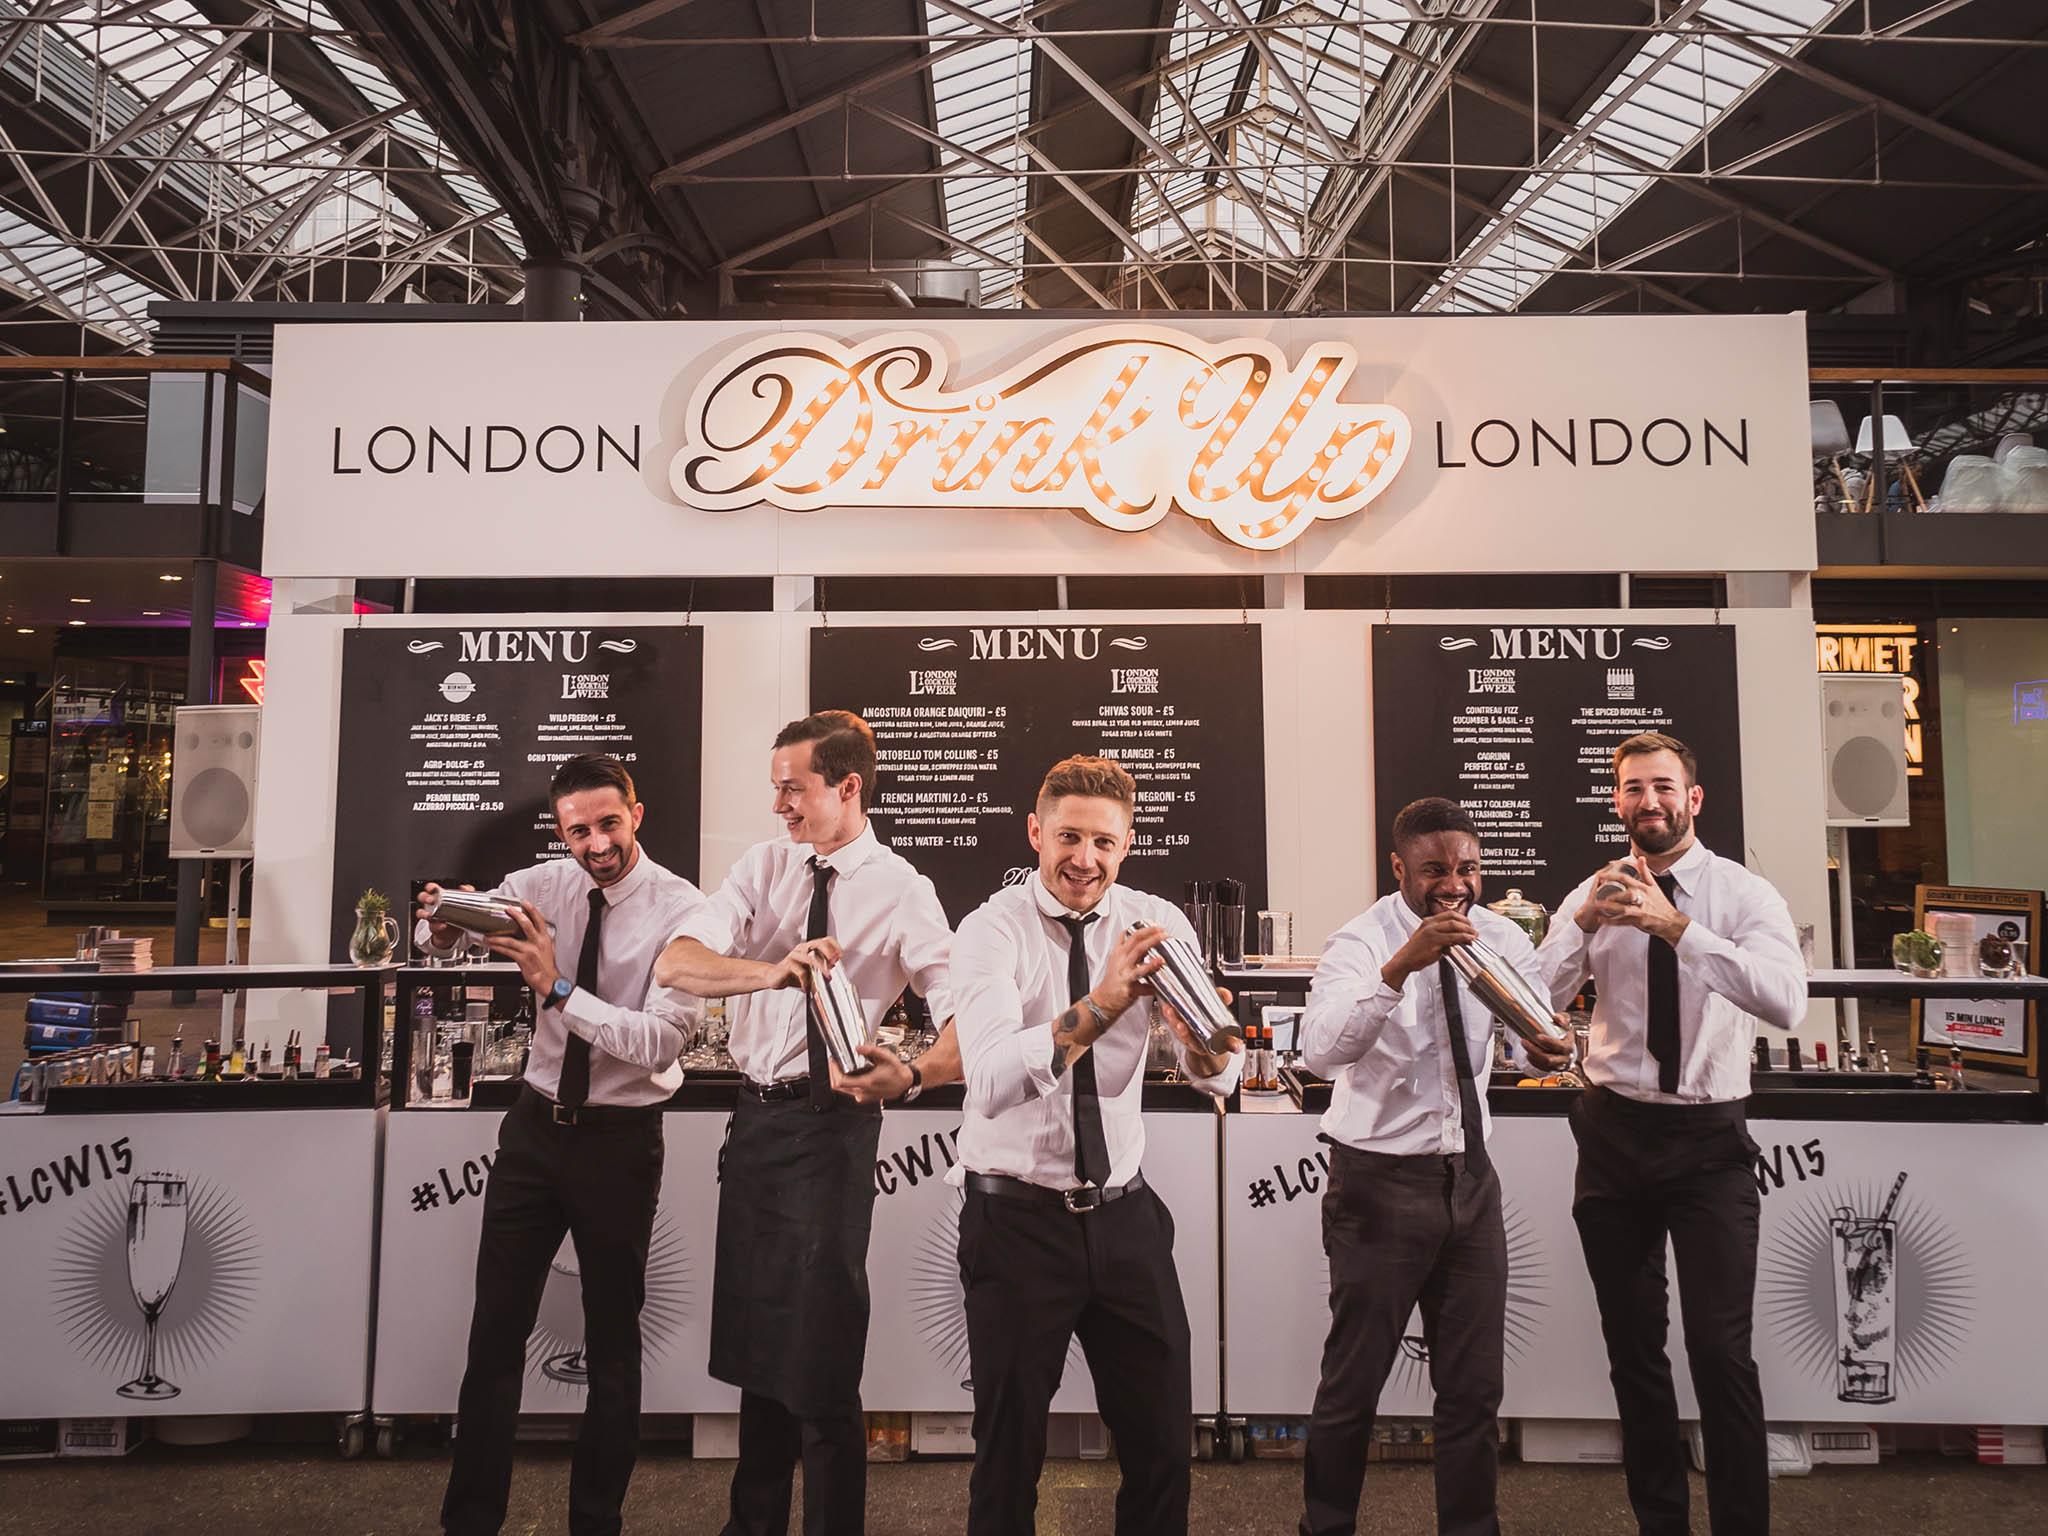 London Cocktail week, organised by DrinkUp.London, is it its seventh year and has partnered with more than 200 bars